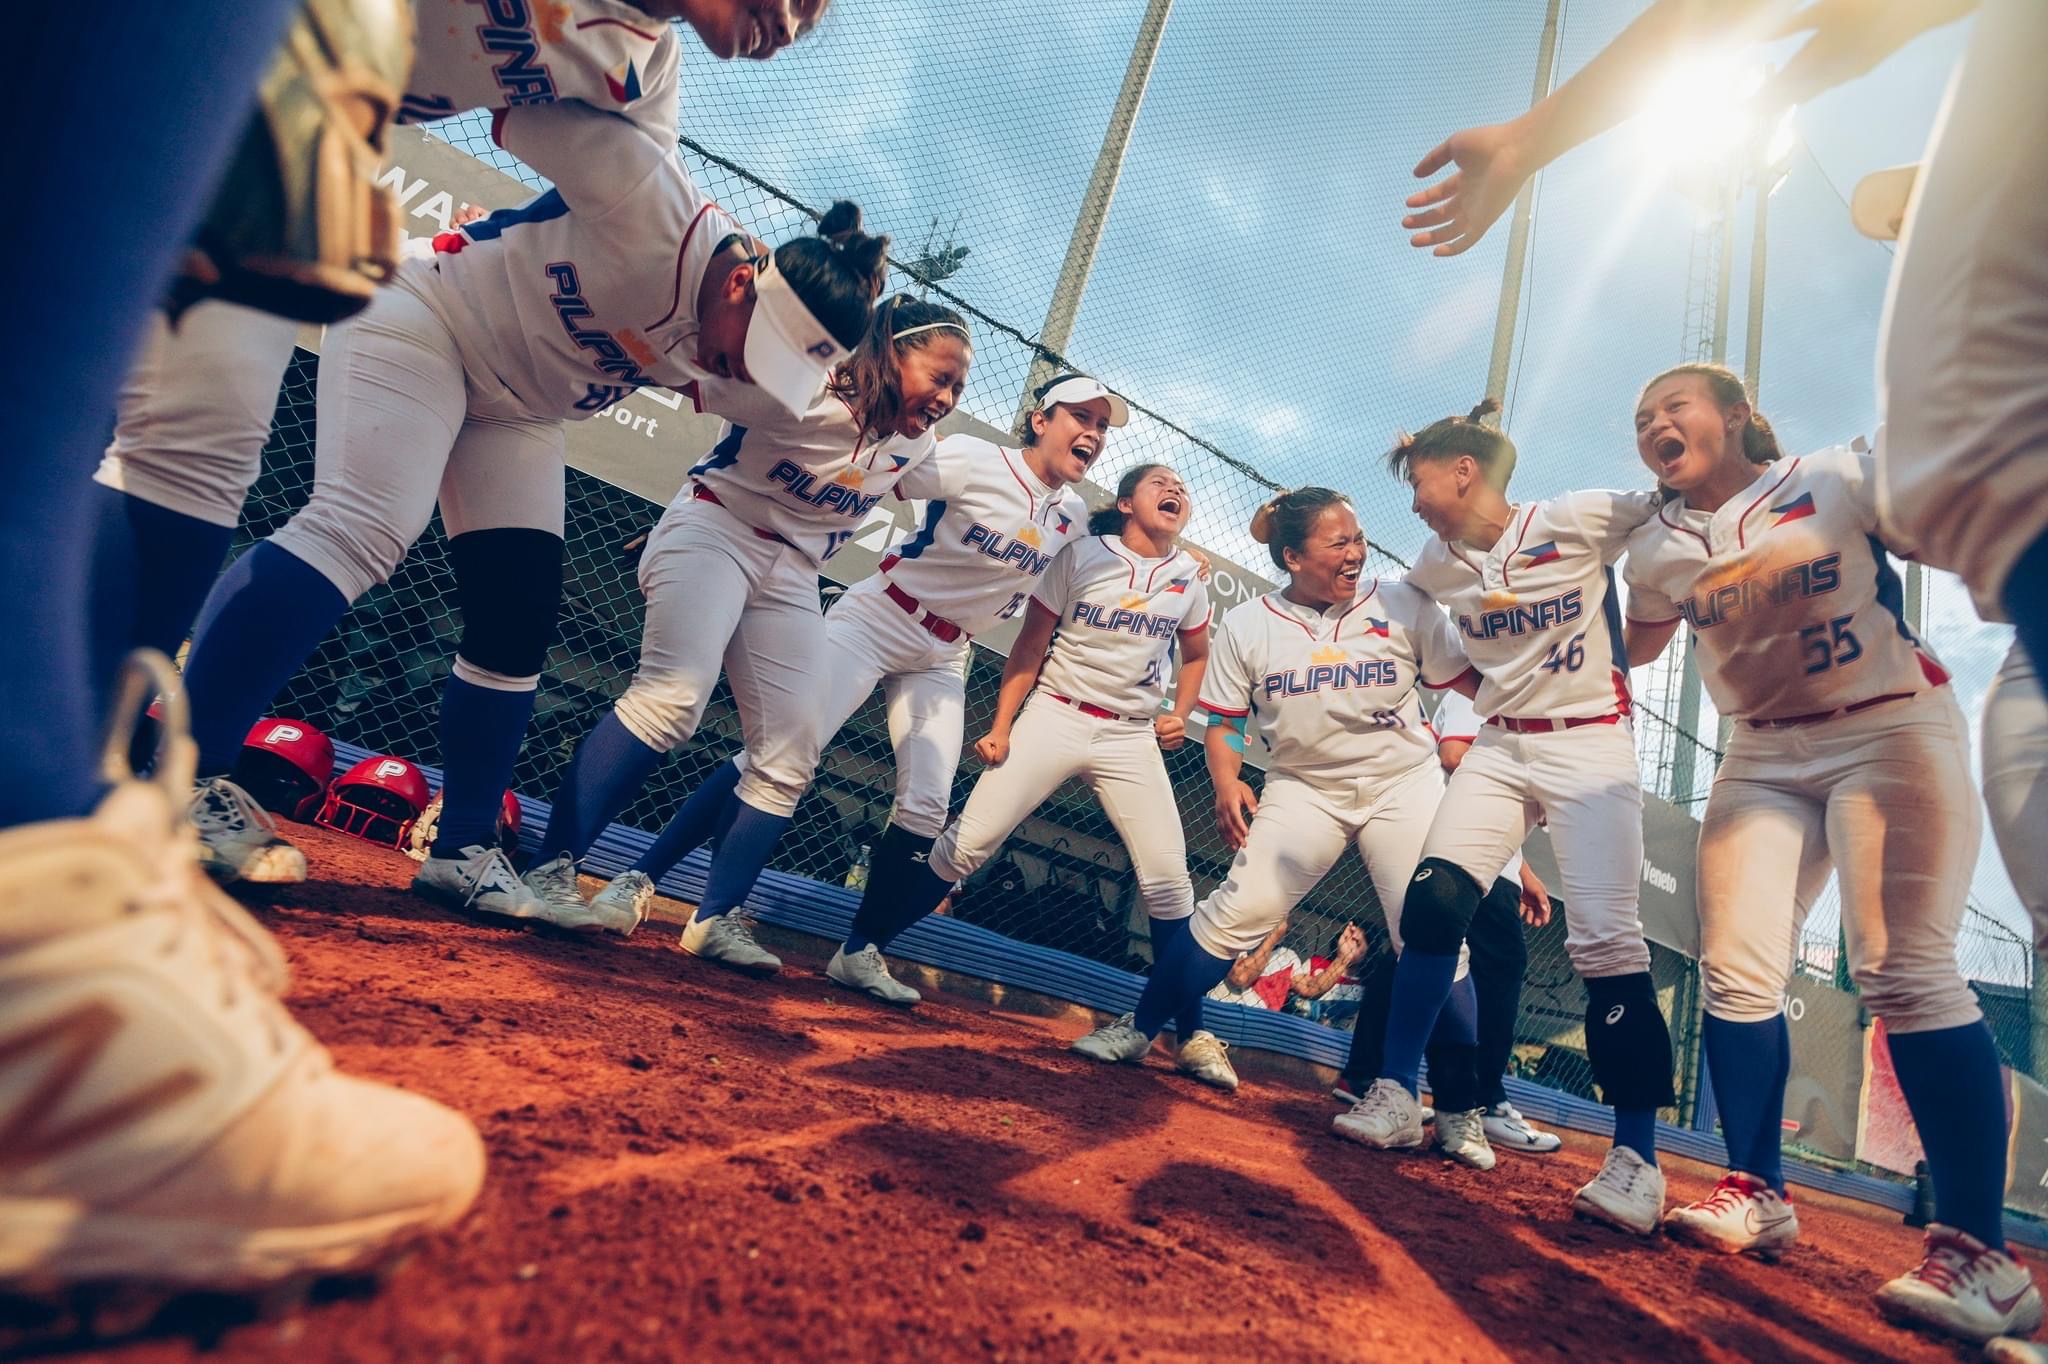 The Philippines at the 2023 Softball Women's World Cup